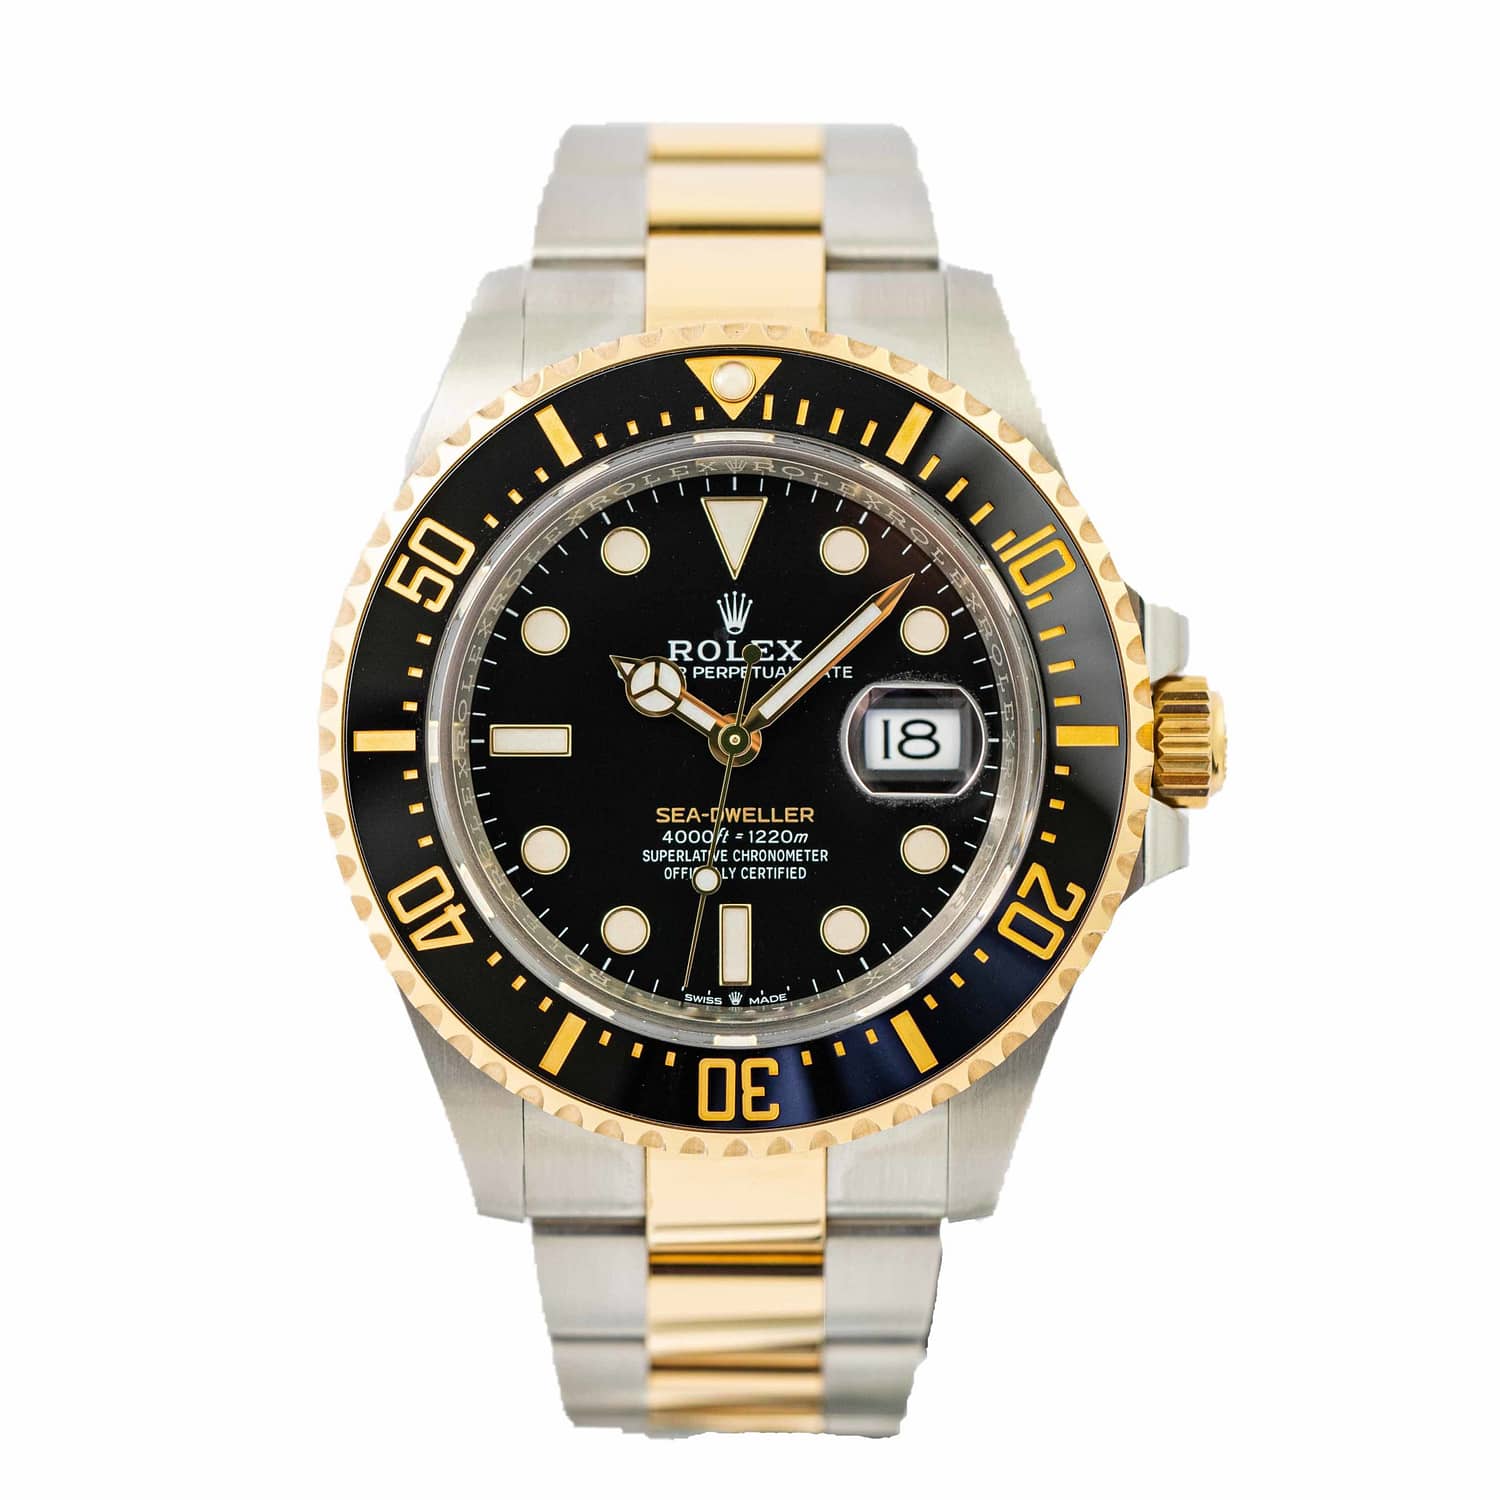 Rolex Sea-Dweller Two-Tone Yellow Gold & Stainless Dial 43mm (126603) — Shreve, Crump &